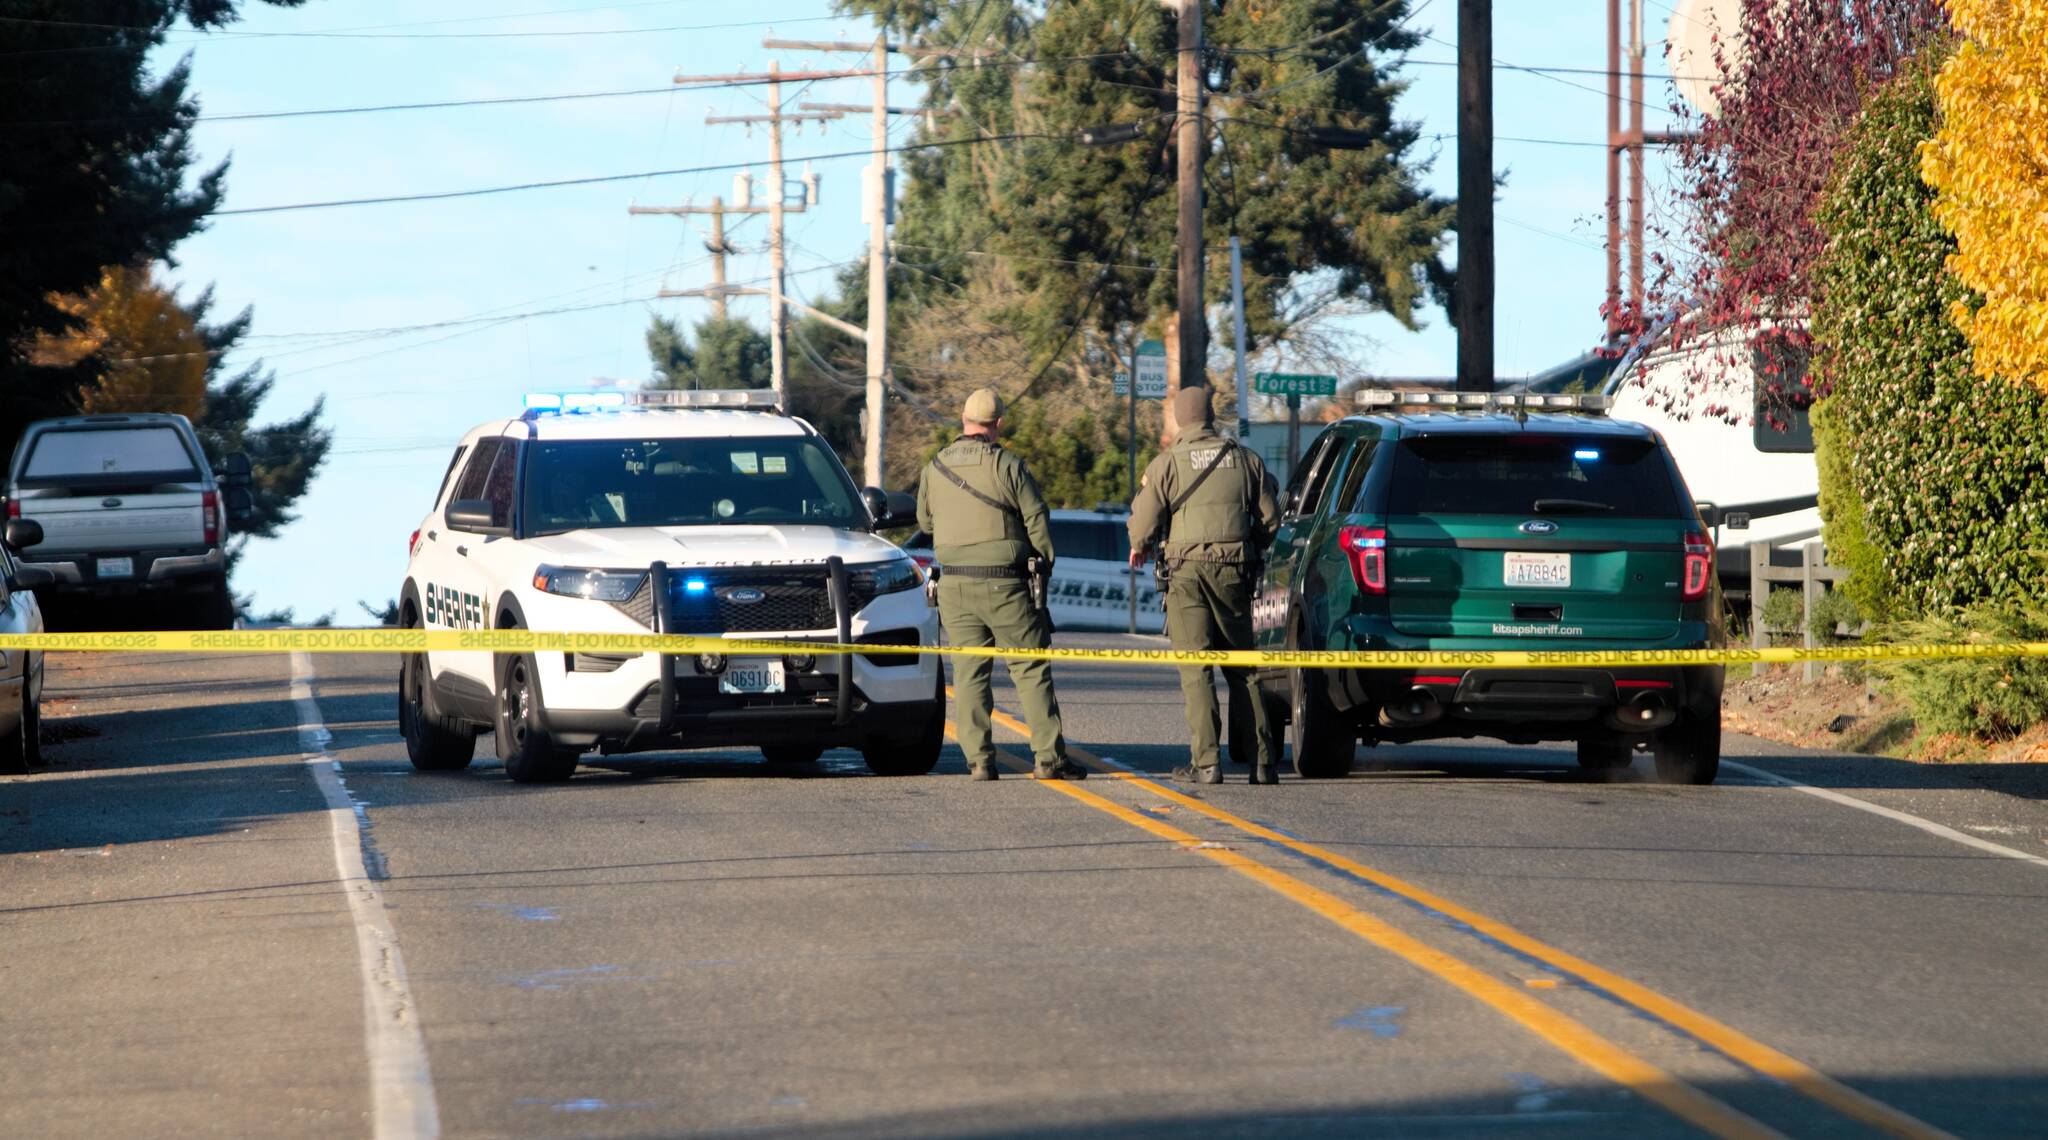 Elisha Meyer/Kitsap News Group
Armed police officers block off traffic on NW Sylvan Way in the midst of a police standoff.